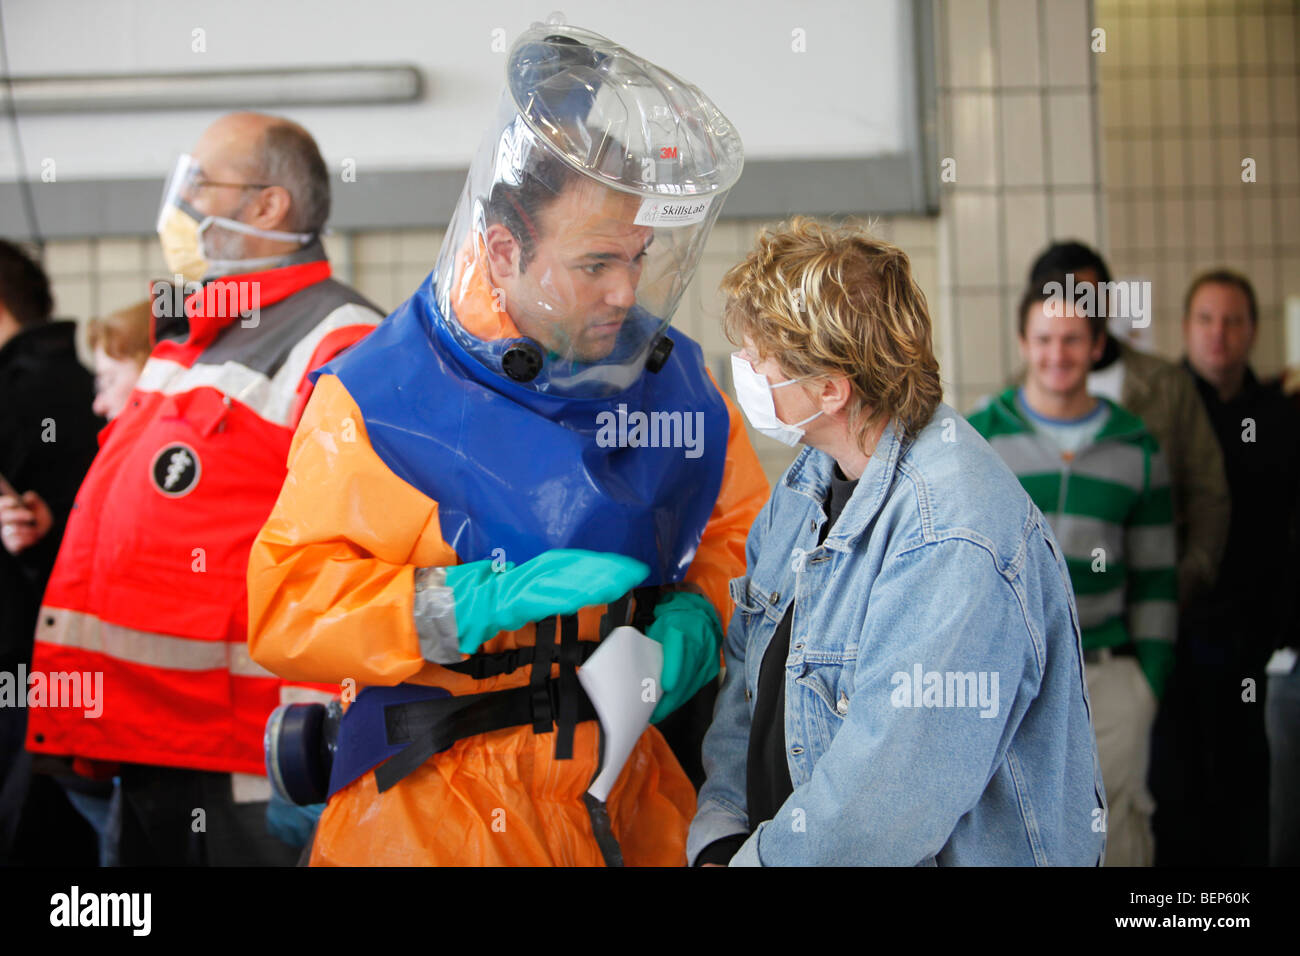 Exercise of a fire brigade, mass vaccination of people against a virus, pandemic exercise, Essen, Germany. Stock Photo